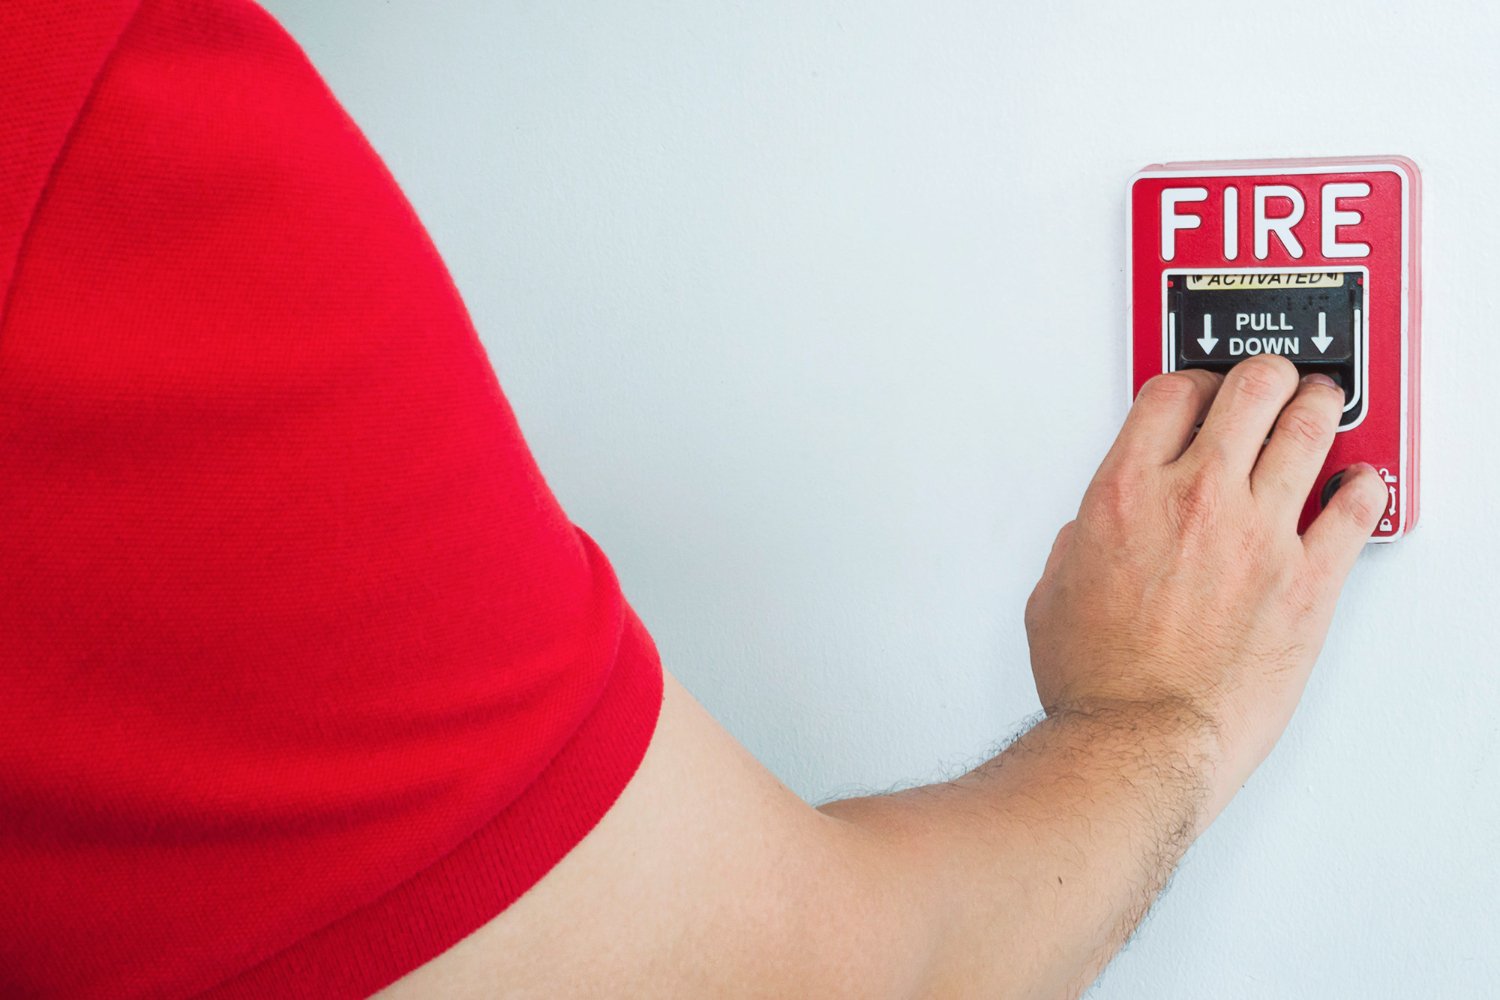 Security services: Fire & Life Safety System